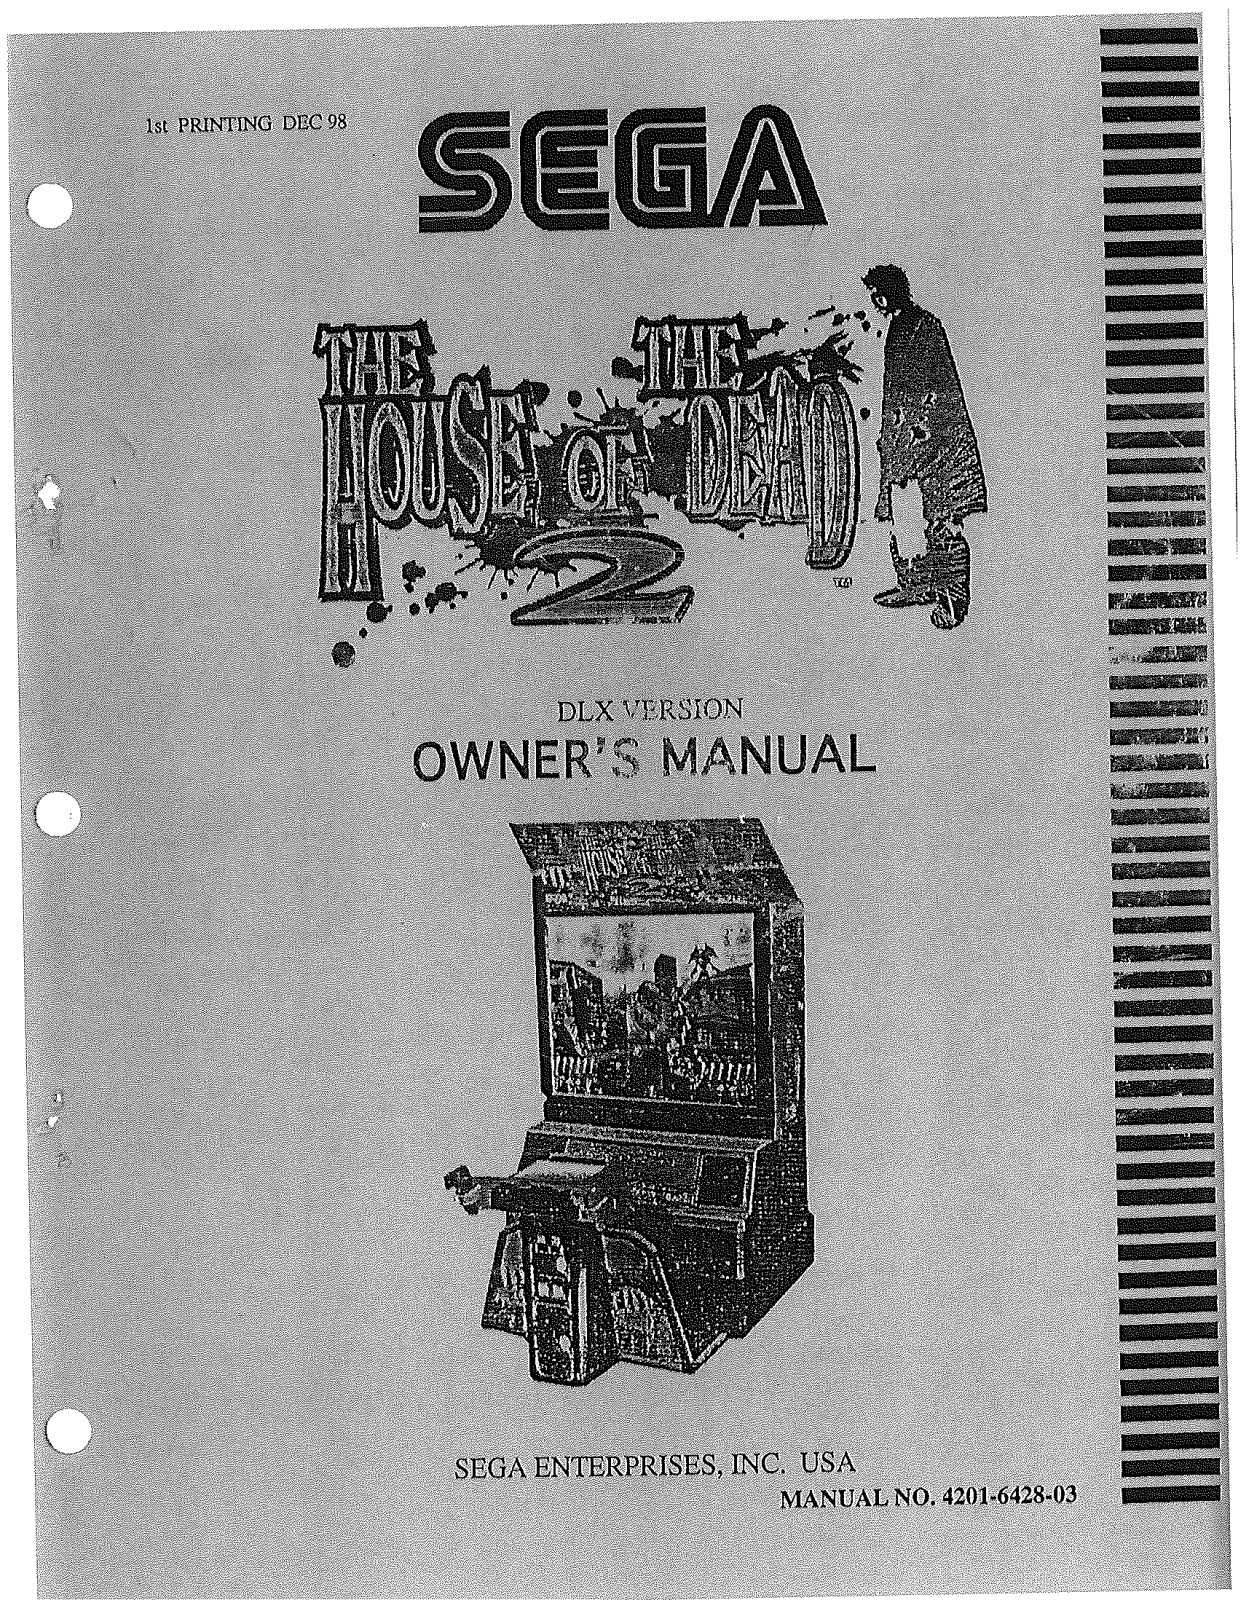 Sega THE HOUSE OF DEAD 2 DELUXE TYPE Manual